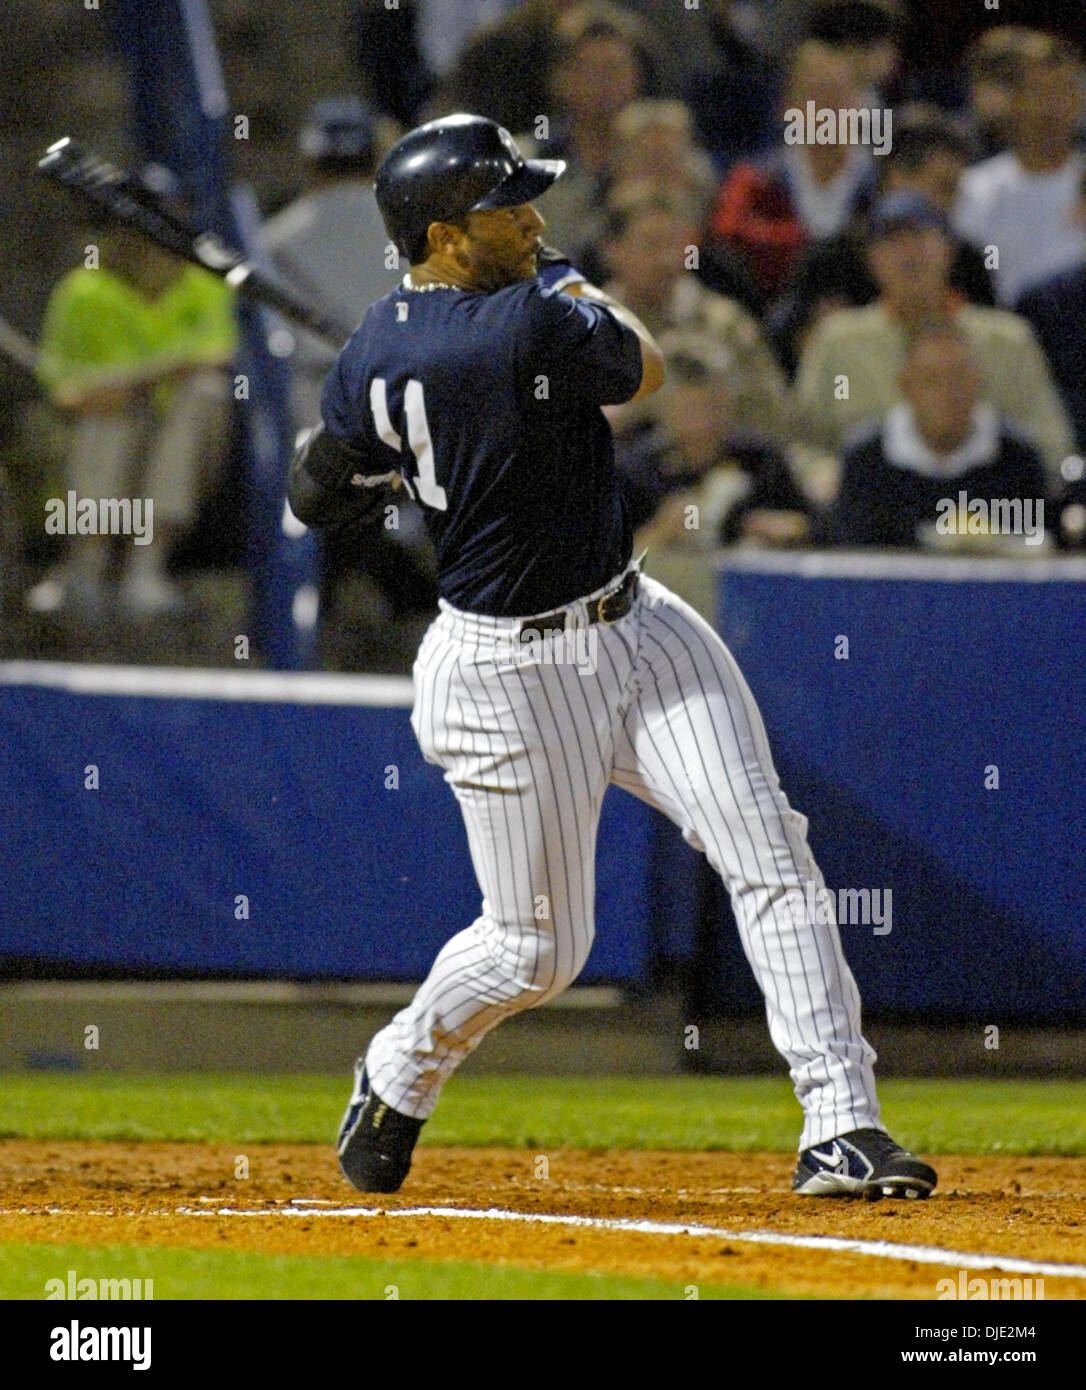 March 12, 2004; Tampa, FL, USA; New York Yankees' outfielder Gary Sheffield  gets a base hit RBI scoring Derek Jeter for the 1st run in the 1st inning  in a spring training